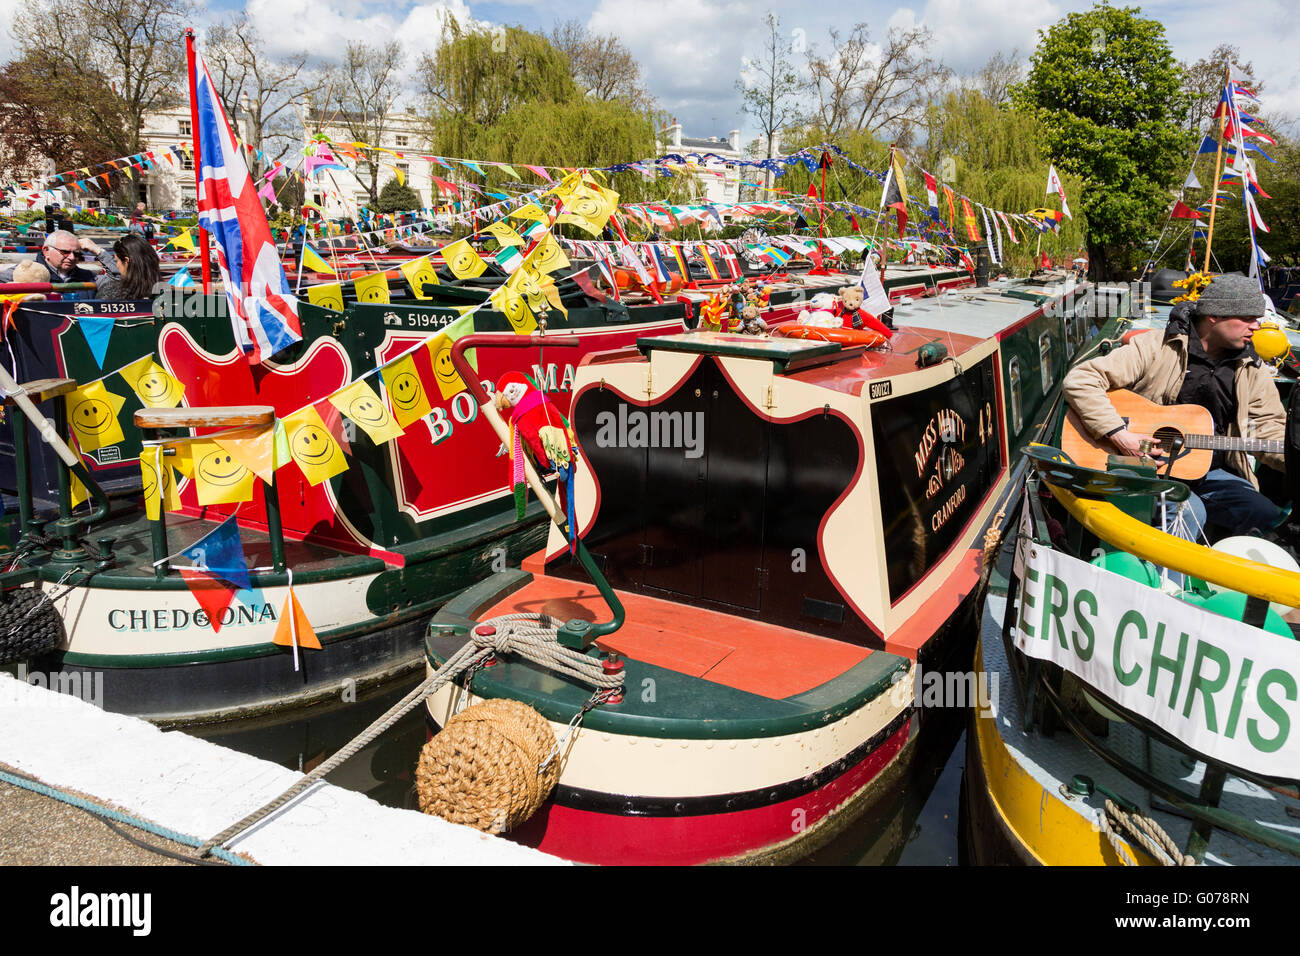 London, UK. 30 April 2016. Decorated narrowboats with bunting and flags at the 2016 Canalway Cavalcade festival in Little Venice, Paddington. The annual event runs over the May Bank Holiday weekend. Credit:  Vibrant Pictures/Alamy Live News Stock Photo